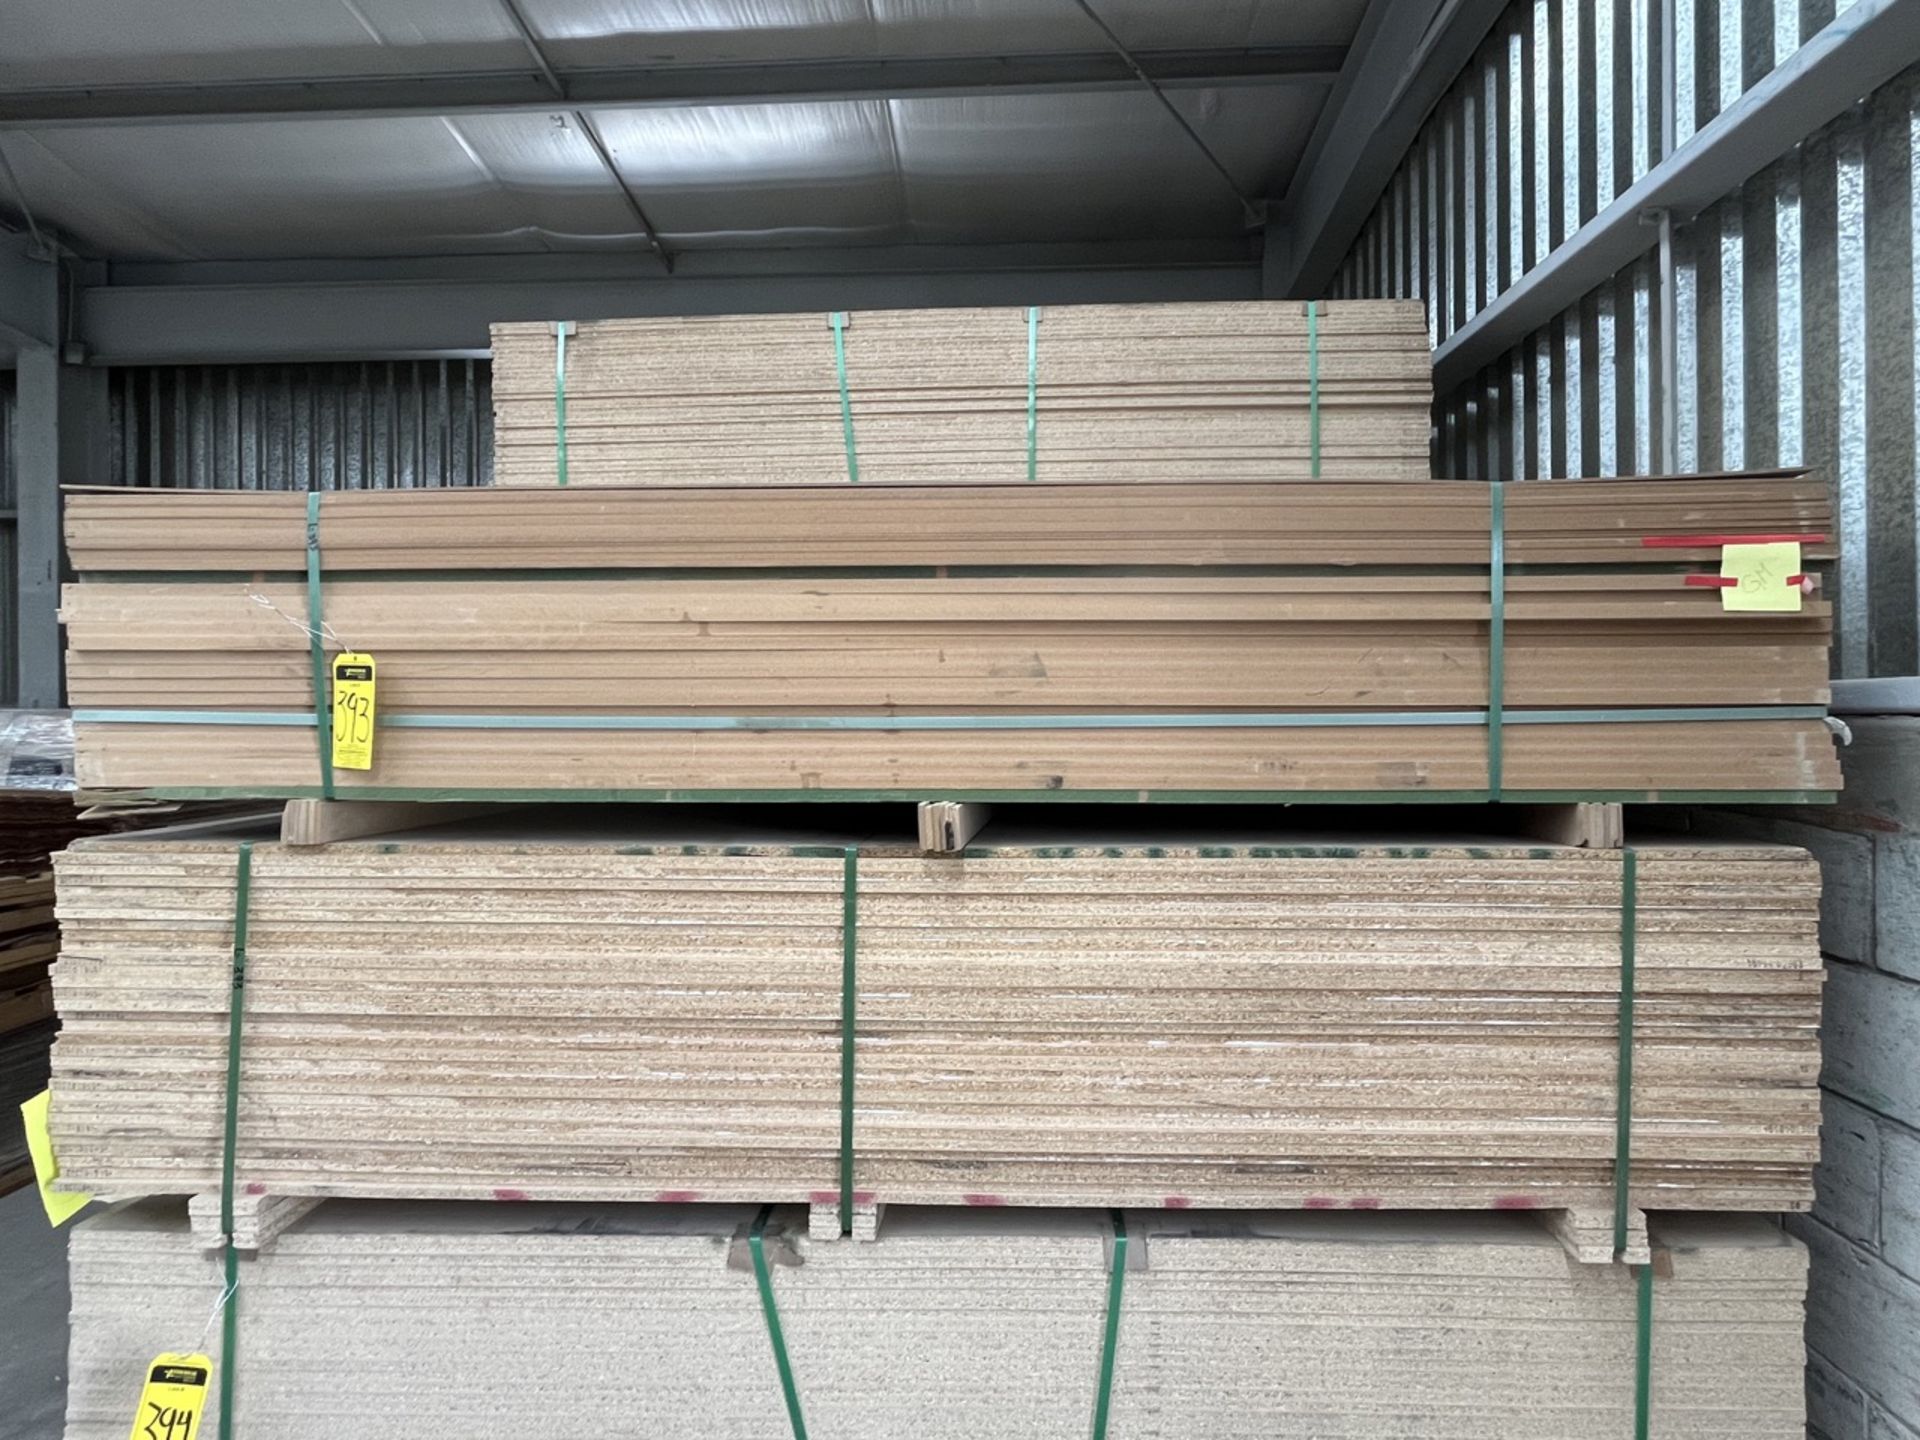 (NEW) Lot of Compressed wood, approximately 69 pieces (23 in 6 mm MDF, 17 in 19 mm MDF, 29 in chip